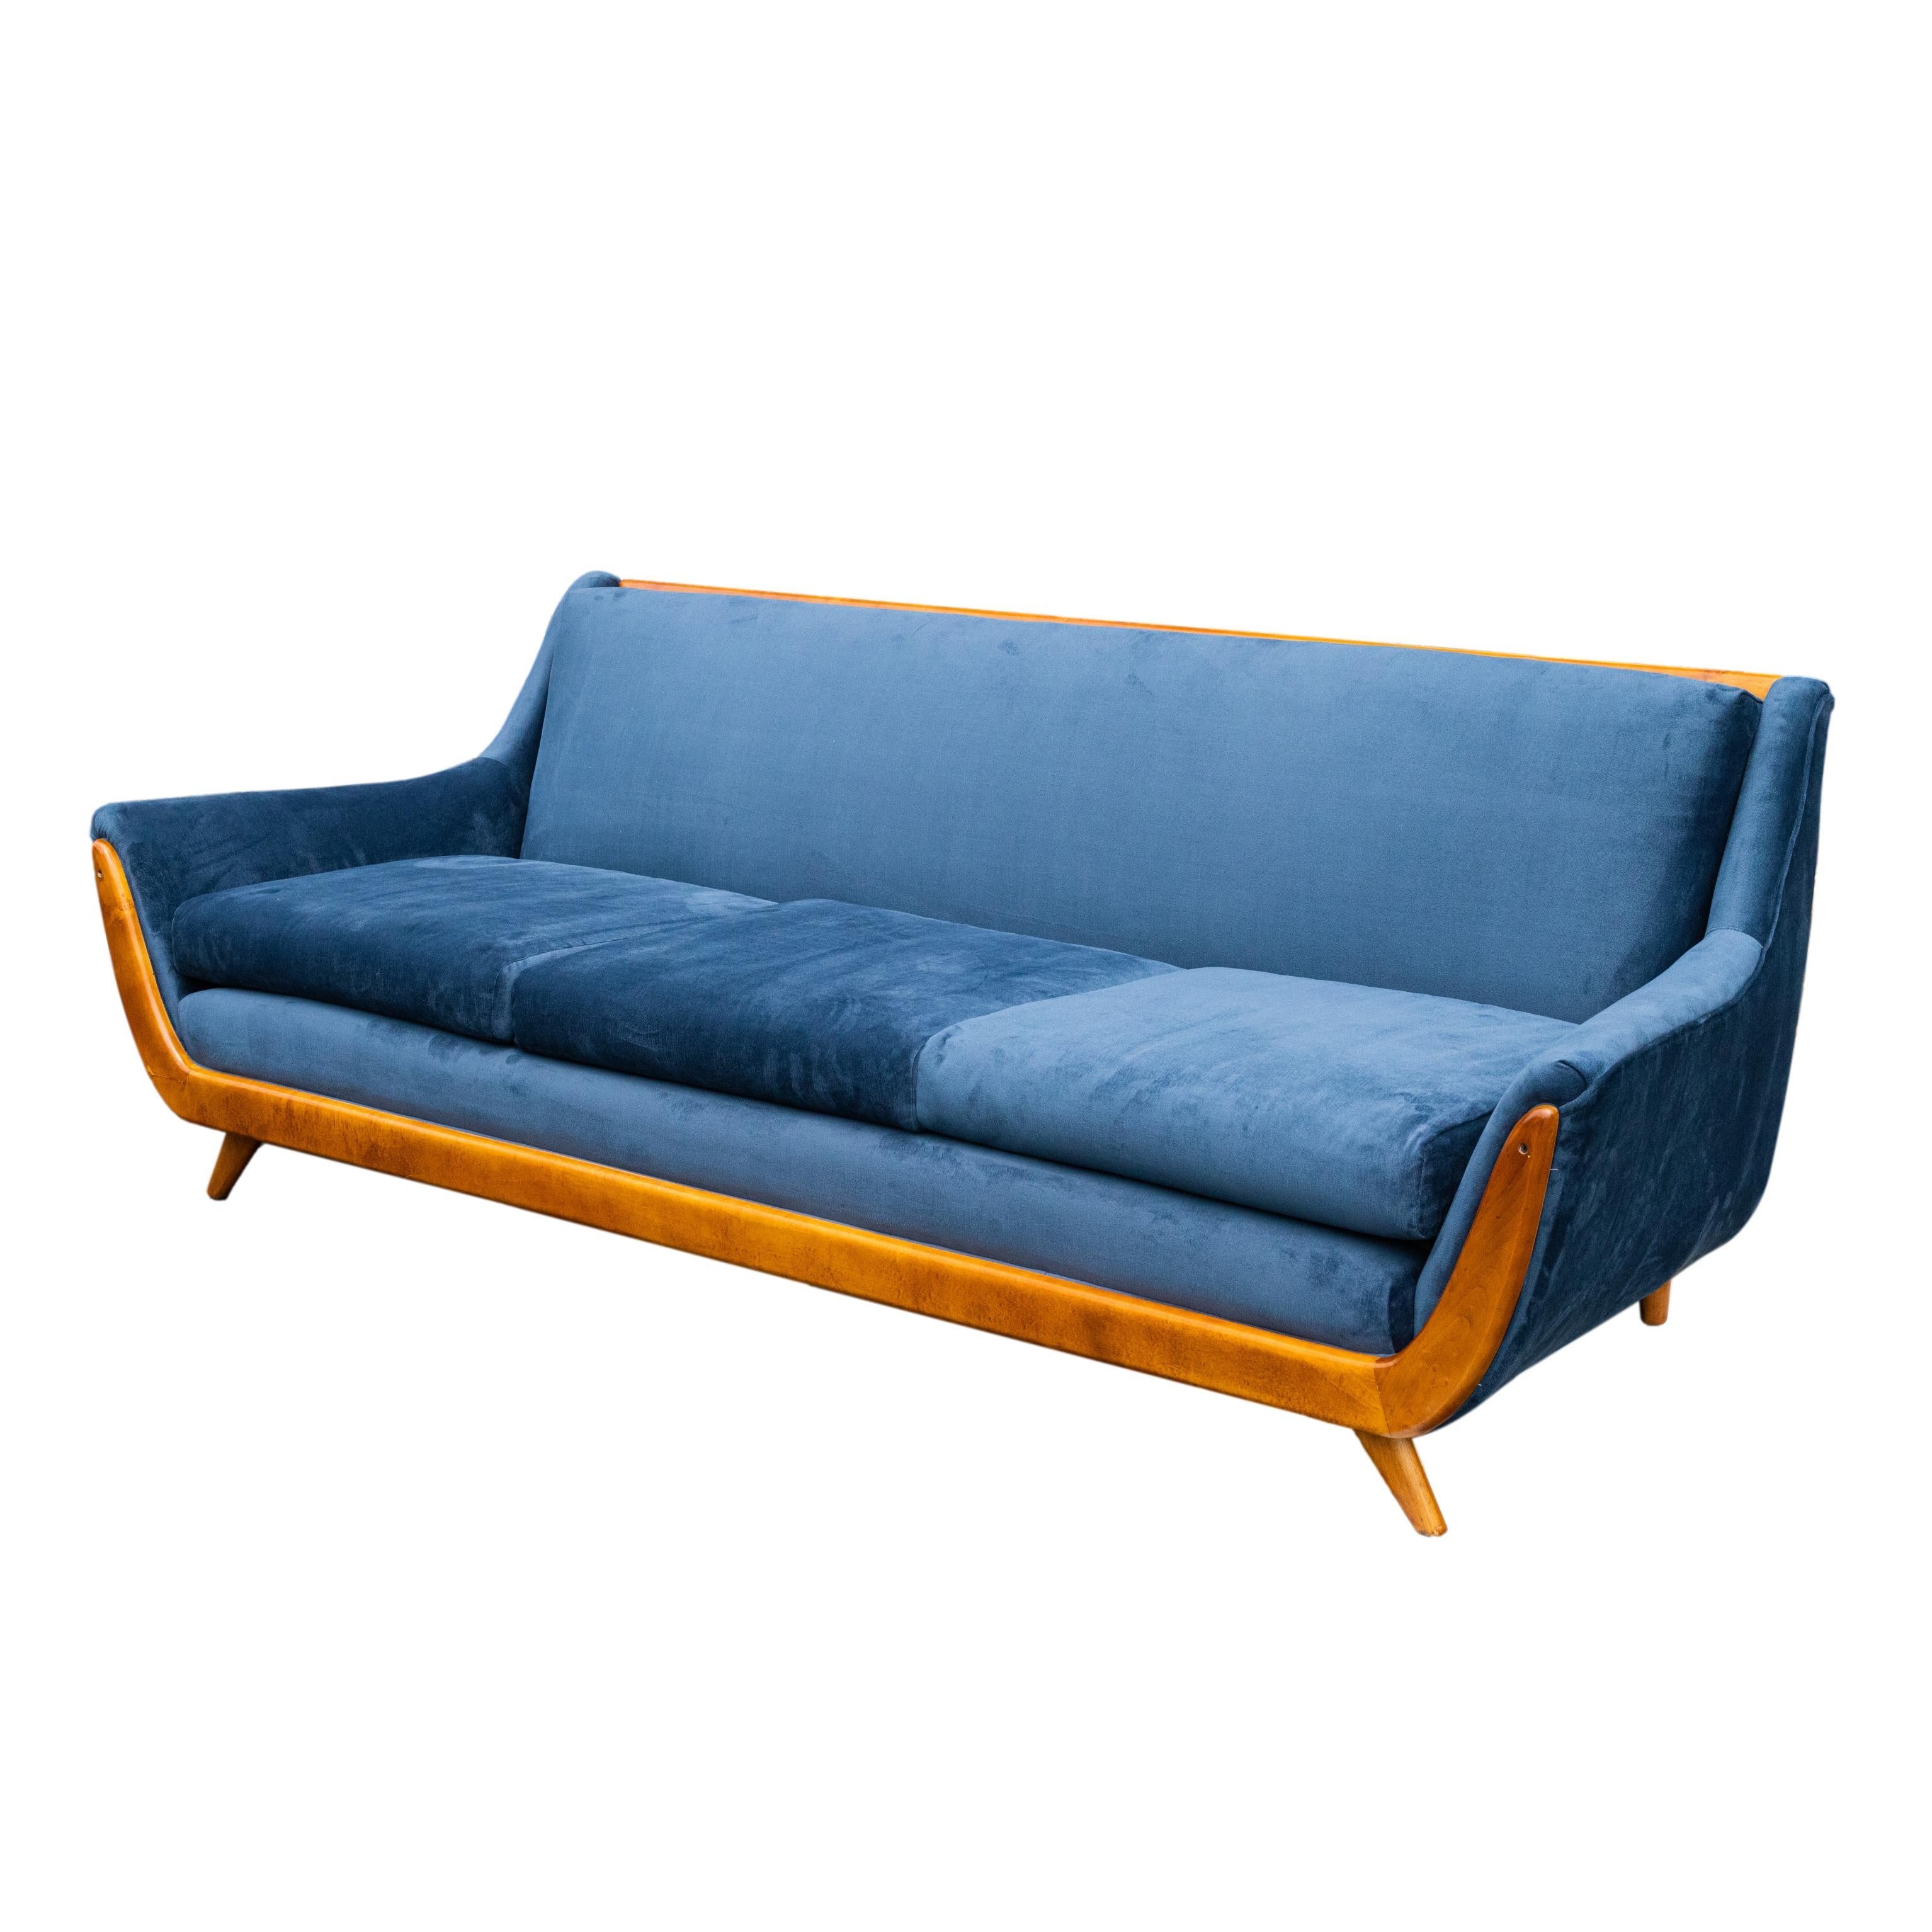 Mid-Centruy Modern Adrian Pearsall-style sofa, the frame in polished figured teak, newly reupholstered in blue velvet, American, ca. 1960.